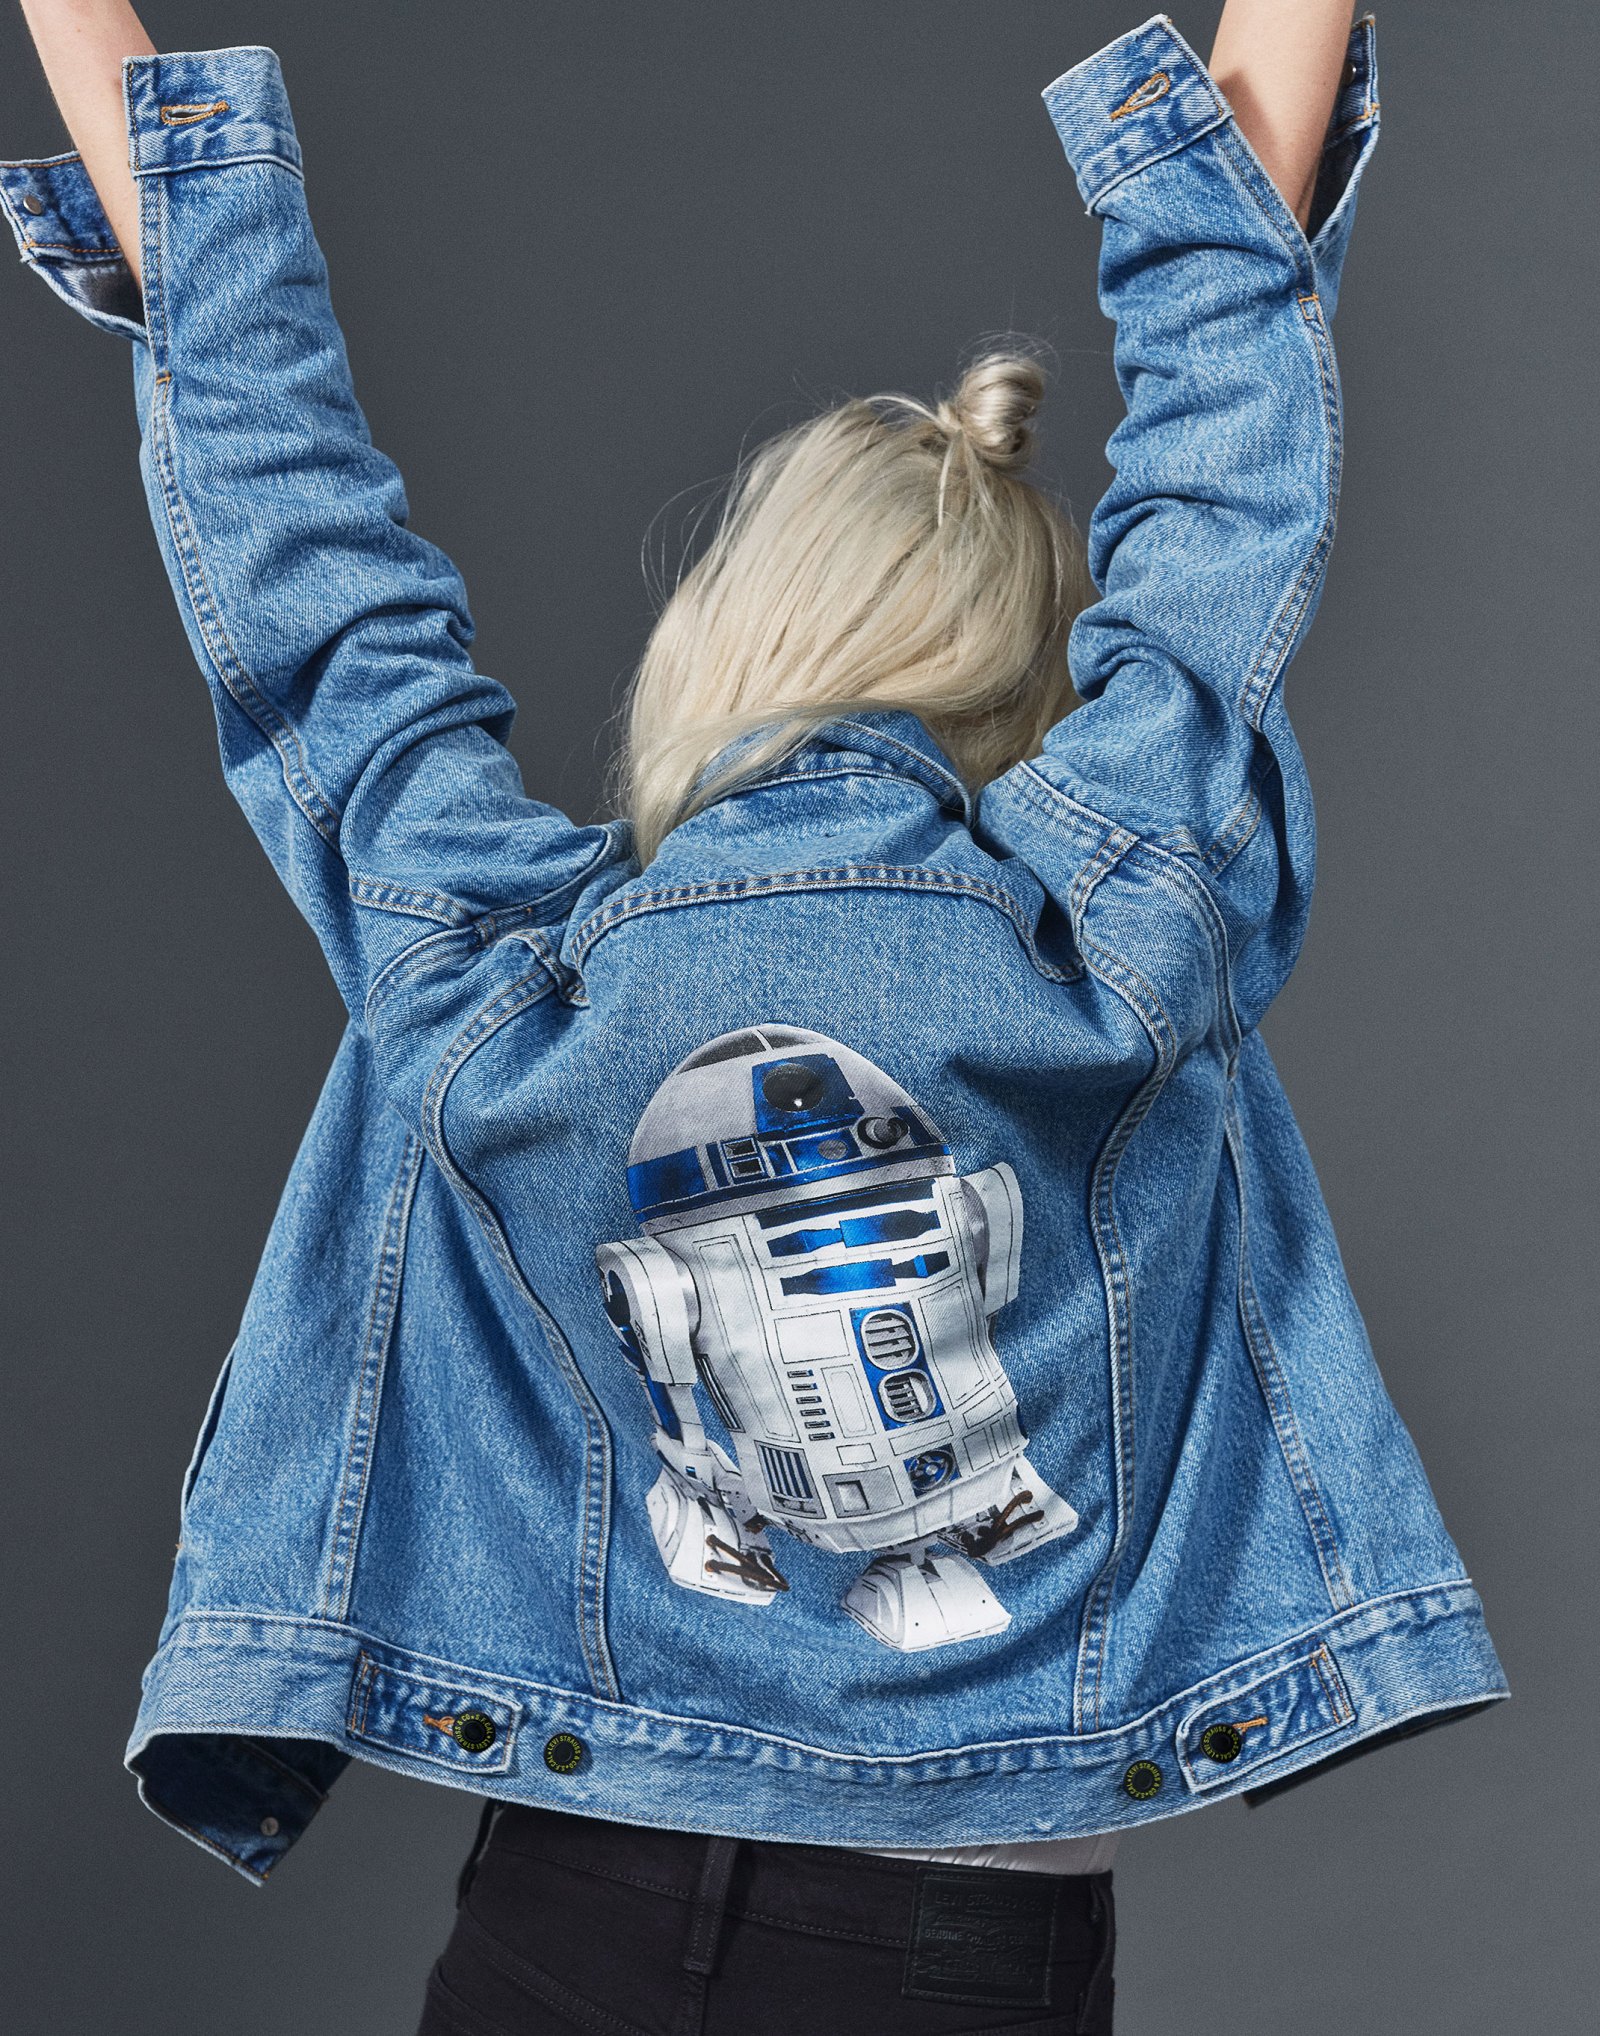 Levi's x Star Wars Collection